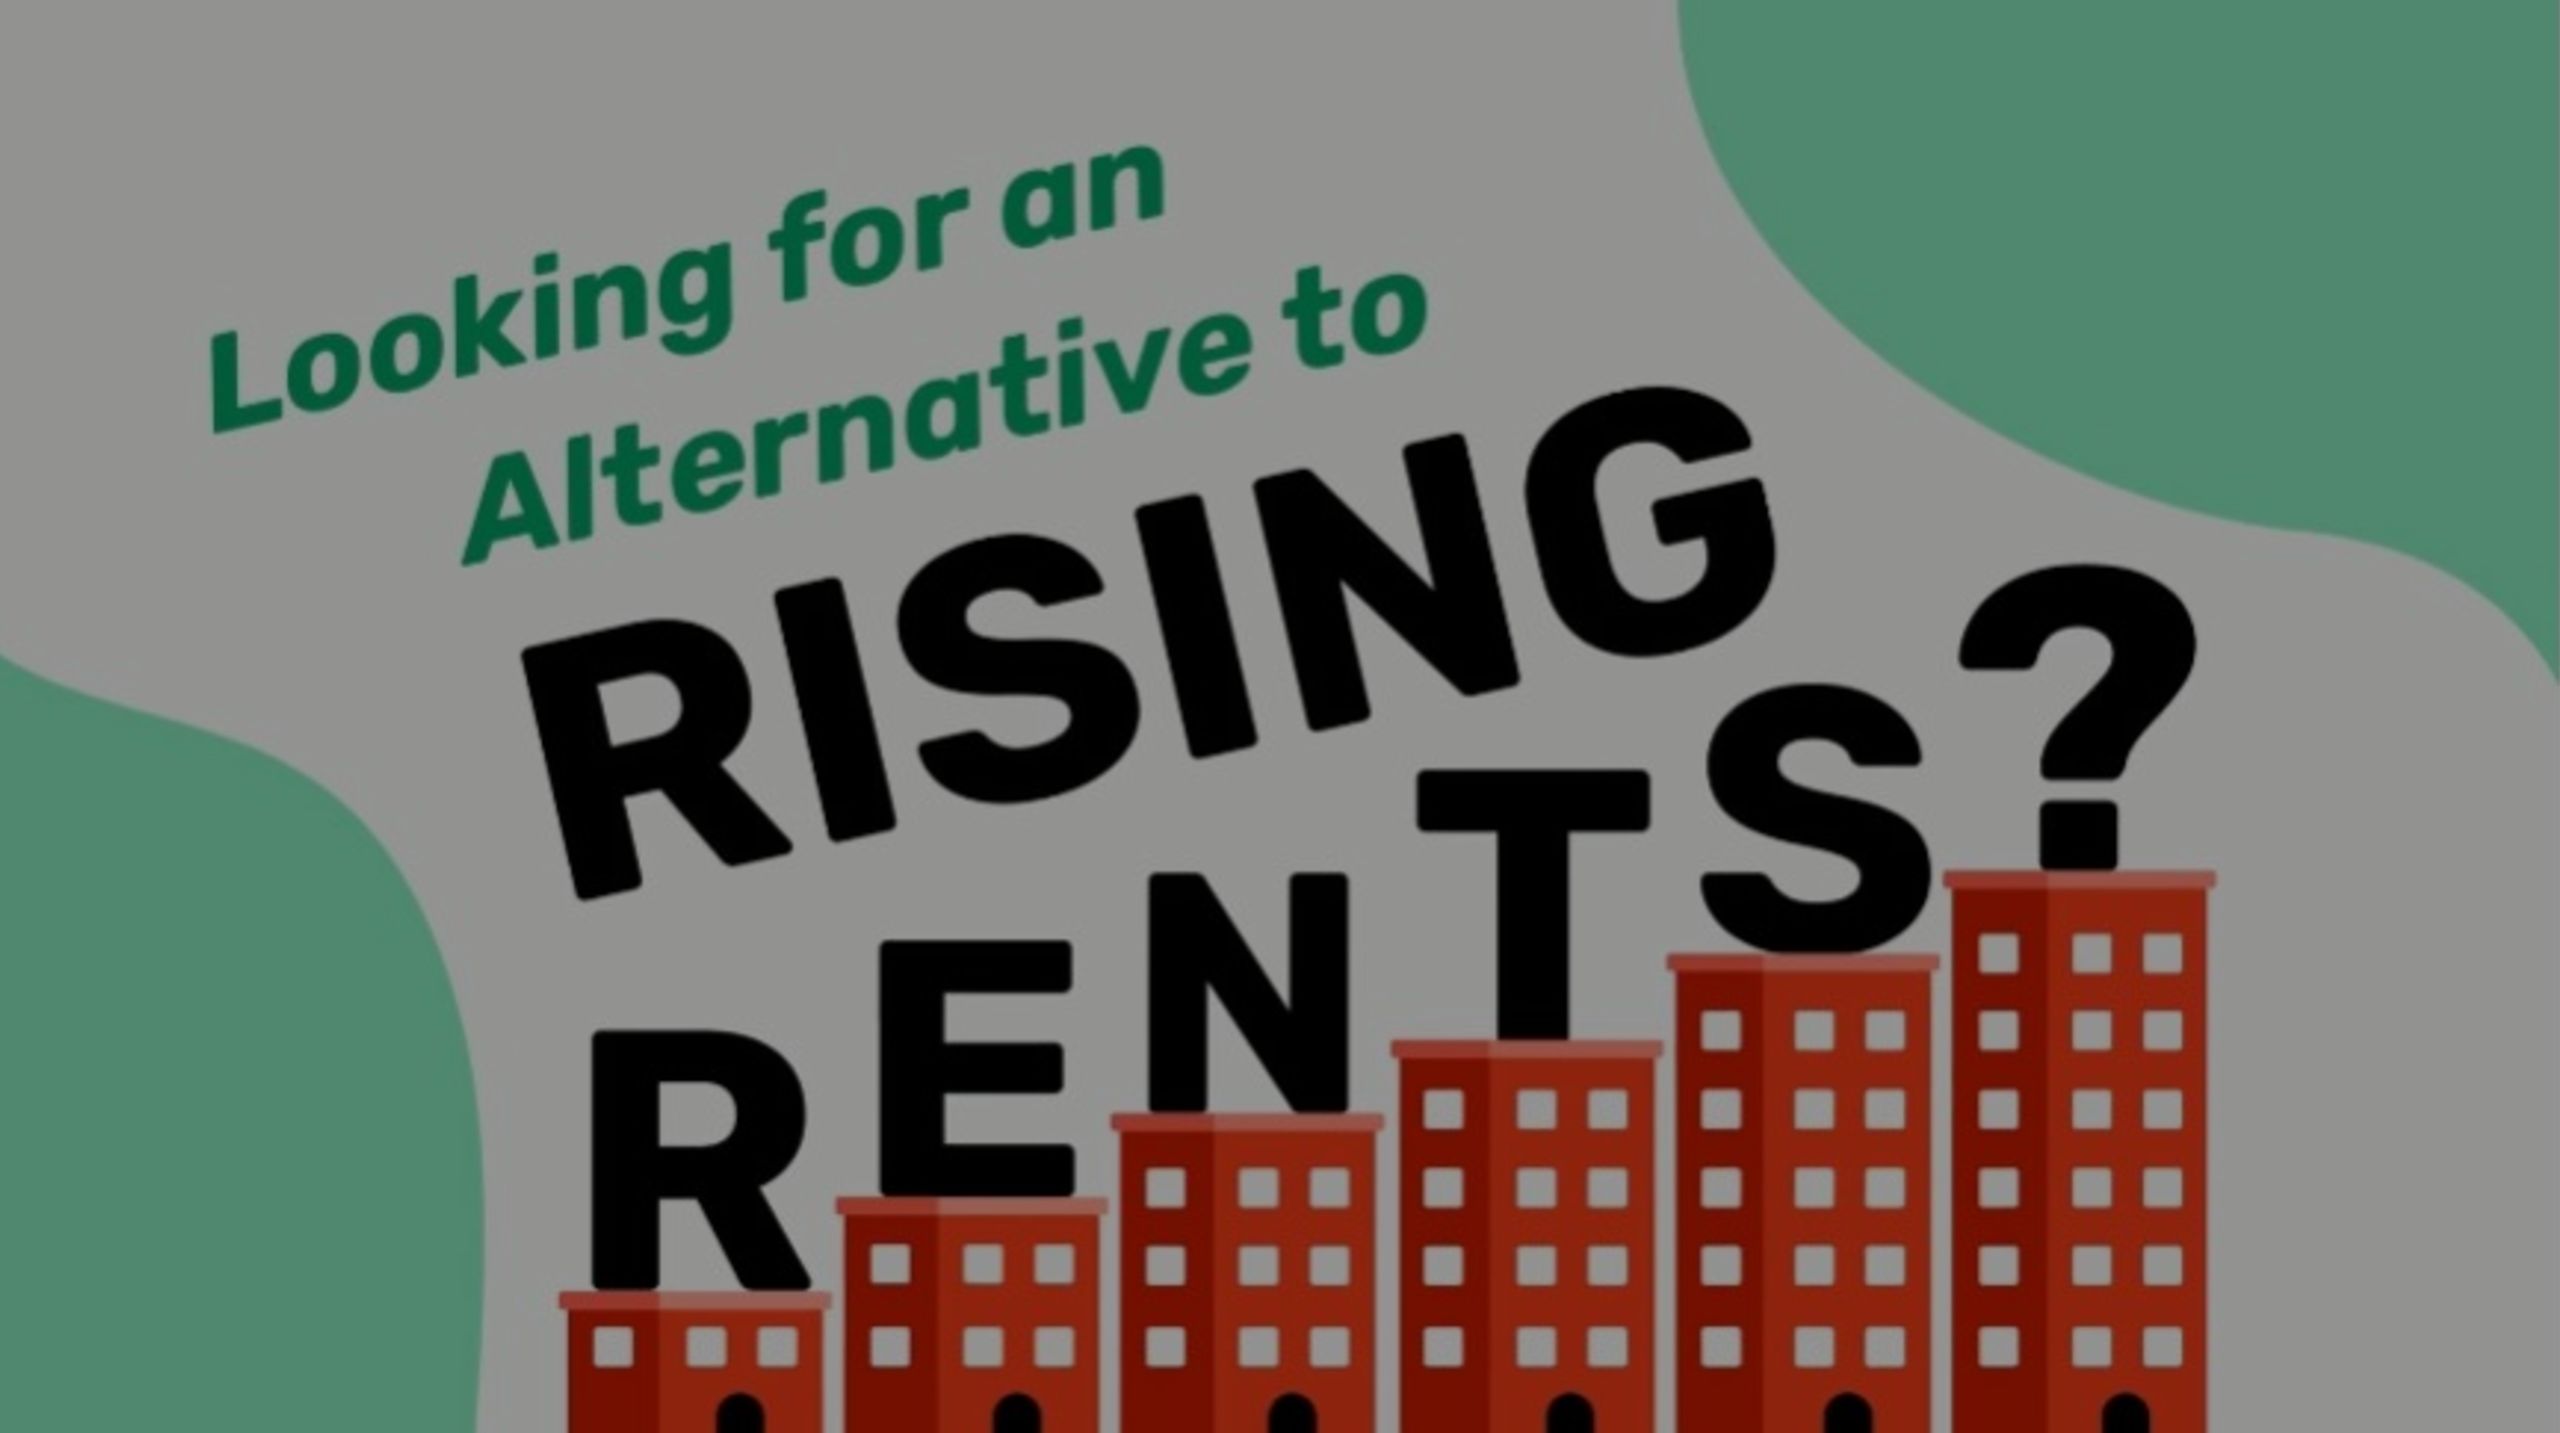 Looking for an Alternative to Rising Rents?